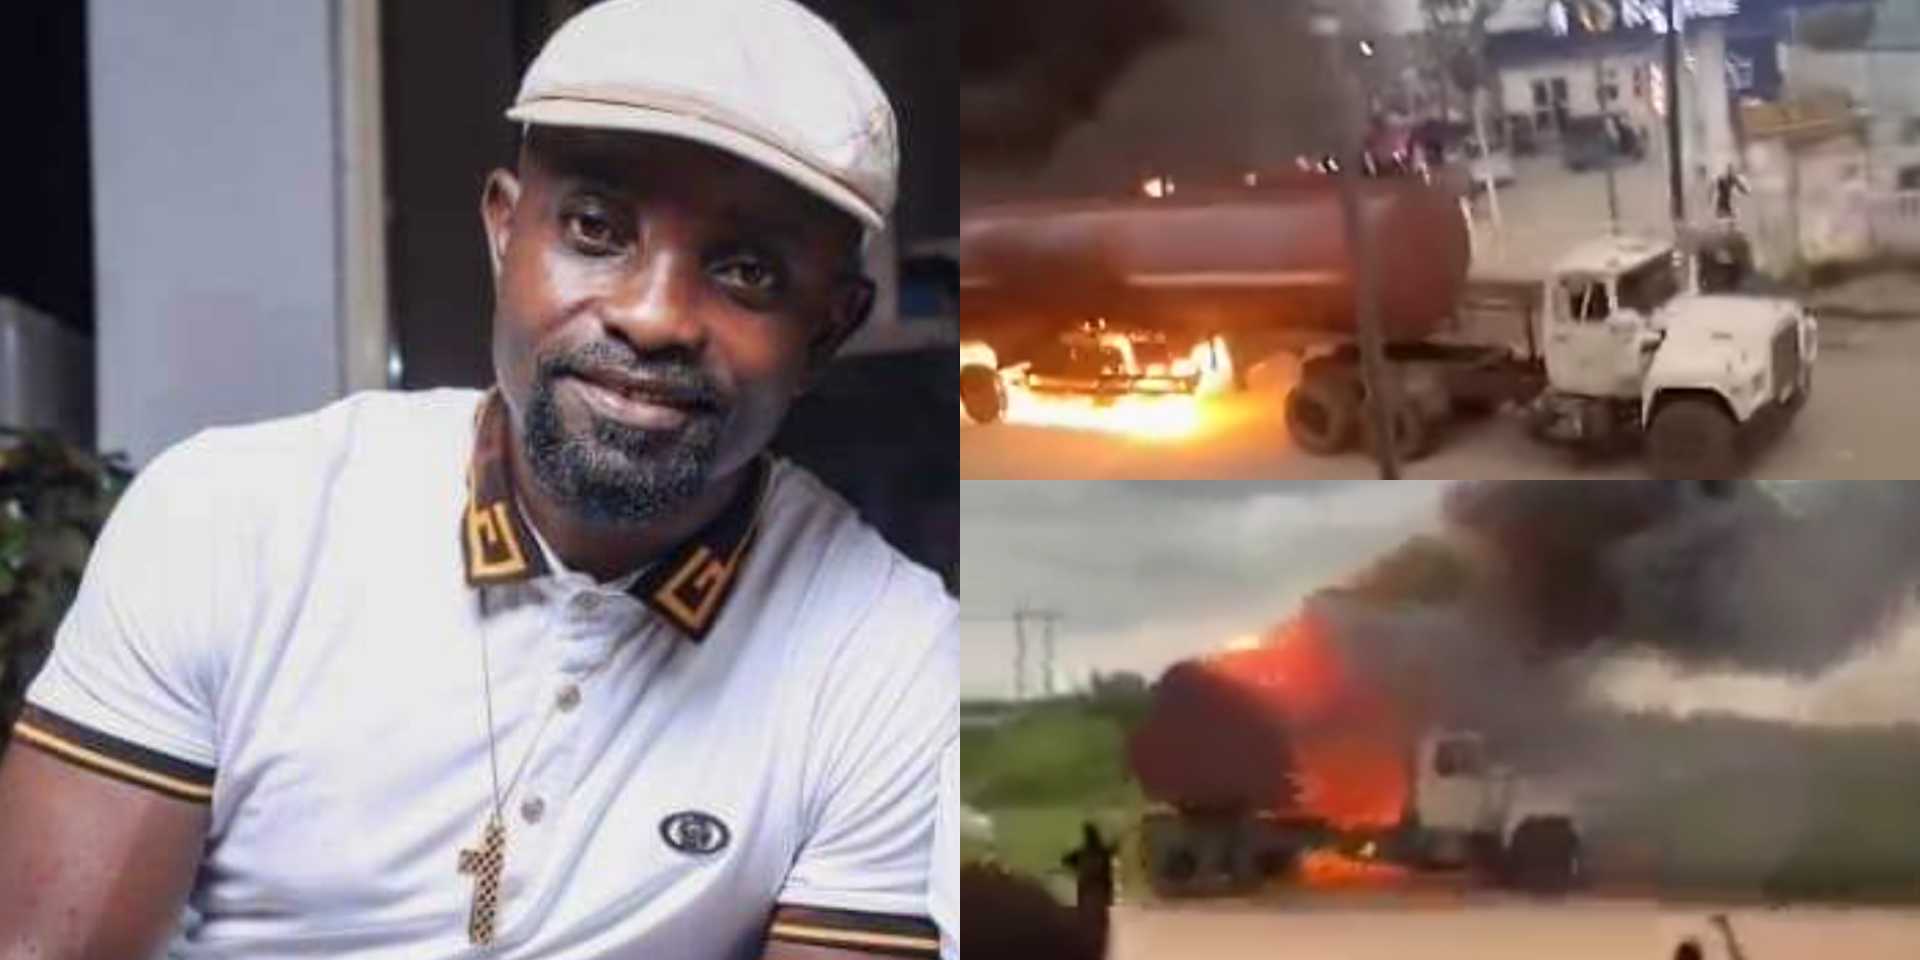 Truck driver hailed a hero as he risks his life to drive a burning truck out of a residential area [Video]